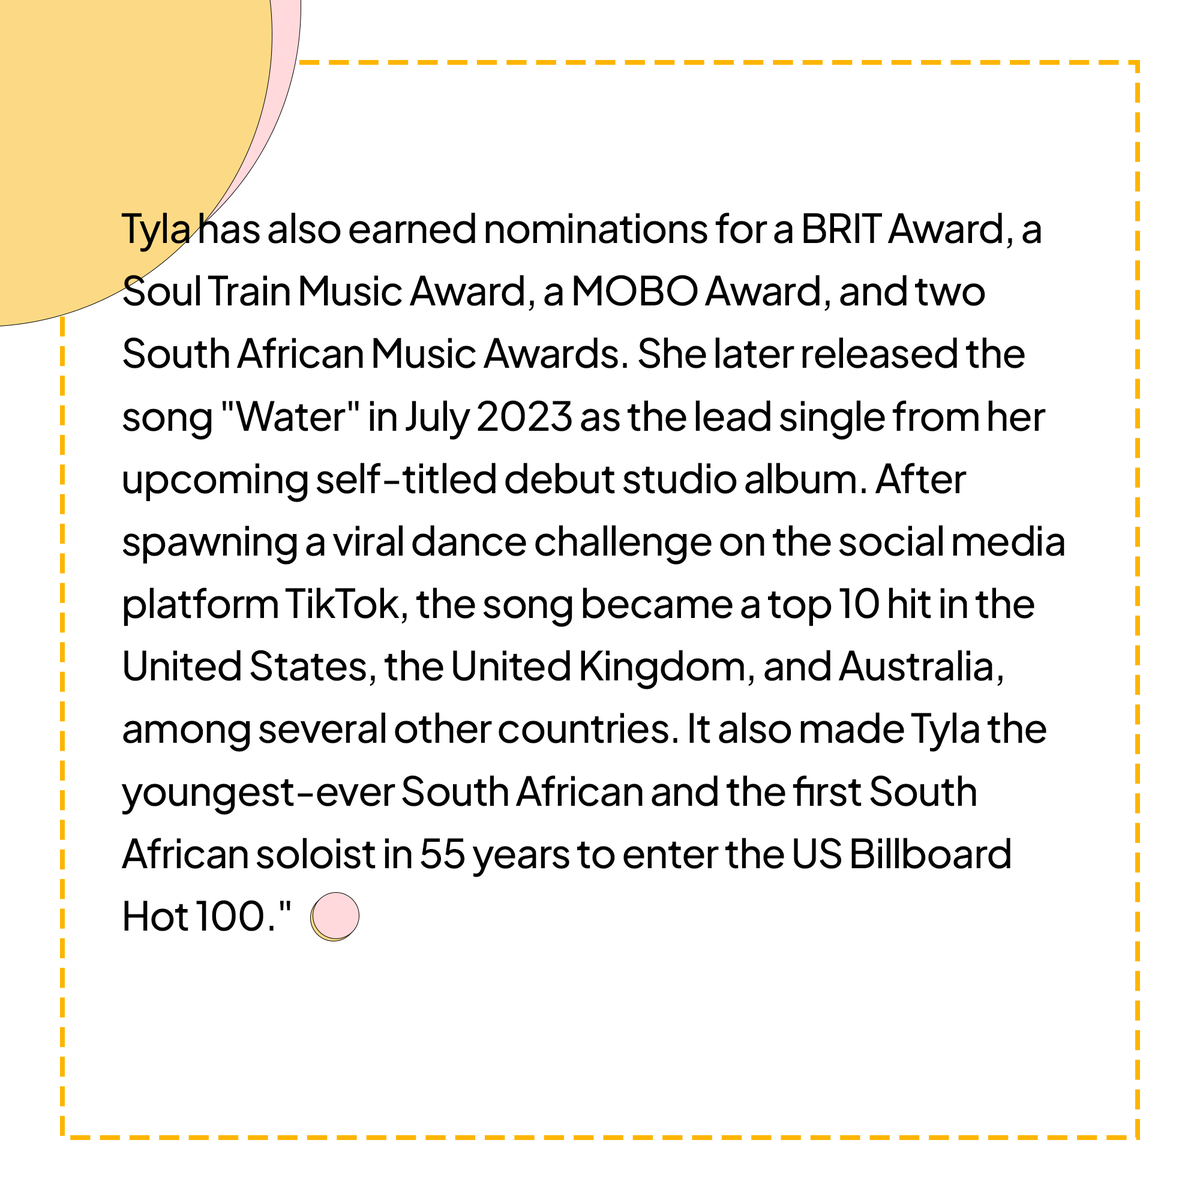 The night of the Grammy Award show was a night to remember! The moment Tyla was announced as a winner was the moment she africa proud. Here’s her journey and how she made it happen.
#GRAMMYs #tyla #africanandproud #African